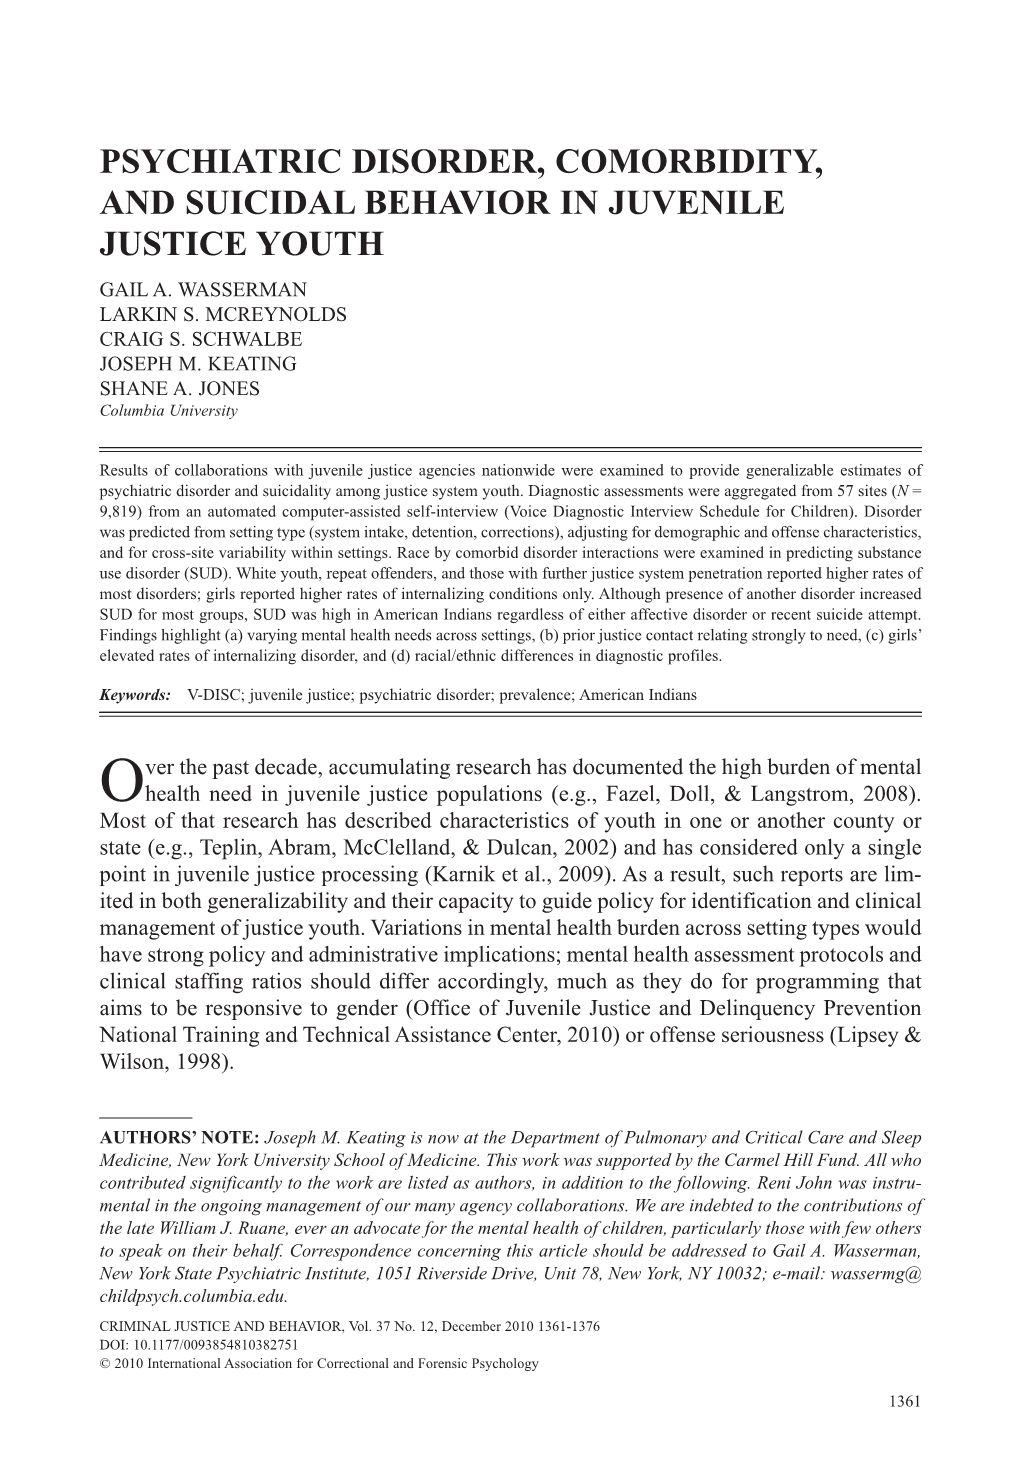 Psychiatric Disorder, Comorbidity, and Suicidal Behavior in Juvenile Justice Youth Gail A